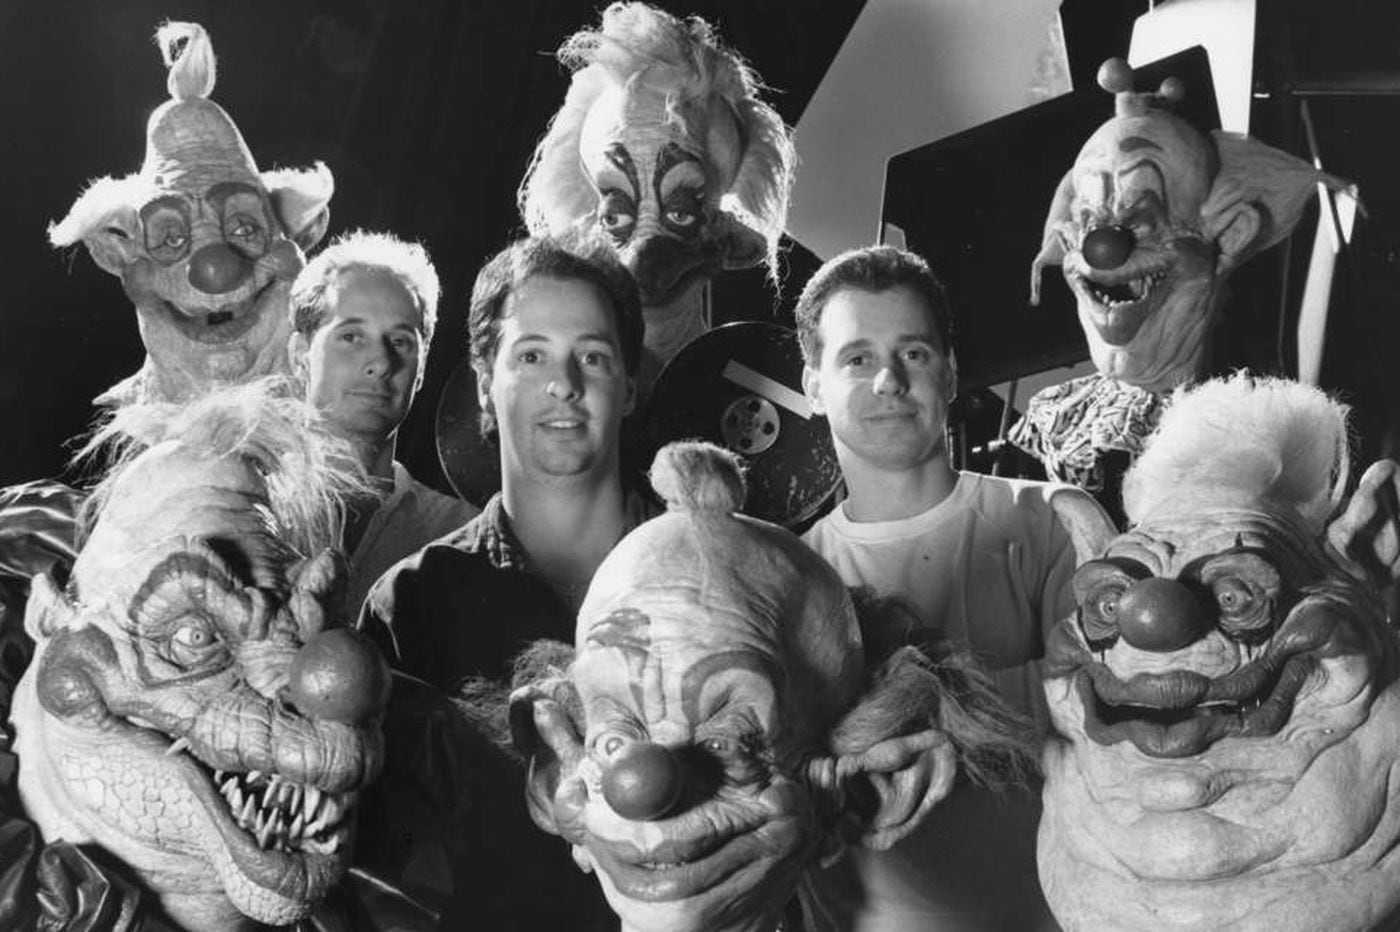 Killer klowns from outer. Клоуны-убийцы из космоса 1988. Killer Klowns from Outer Space 1988.